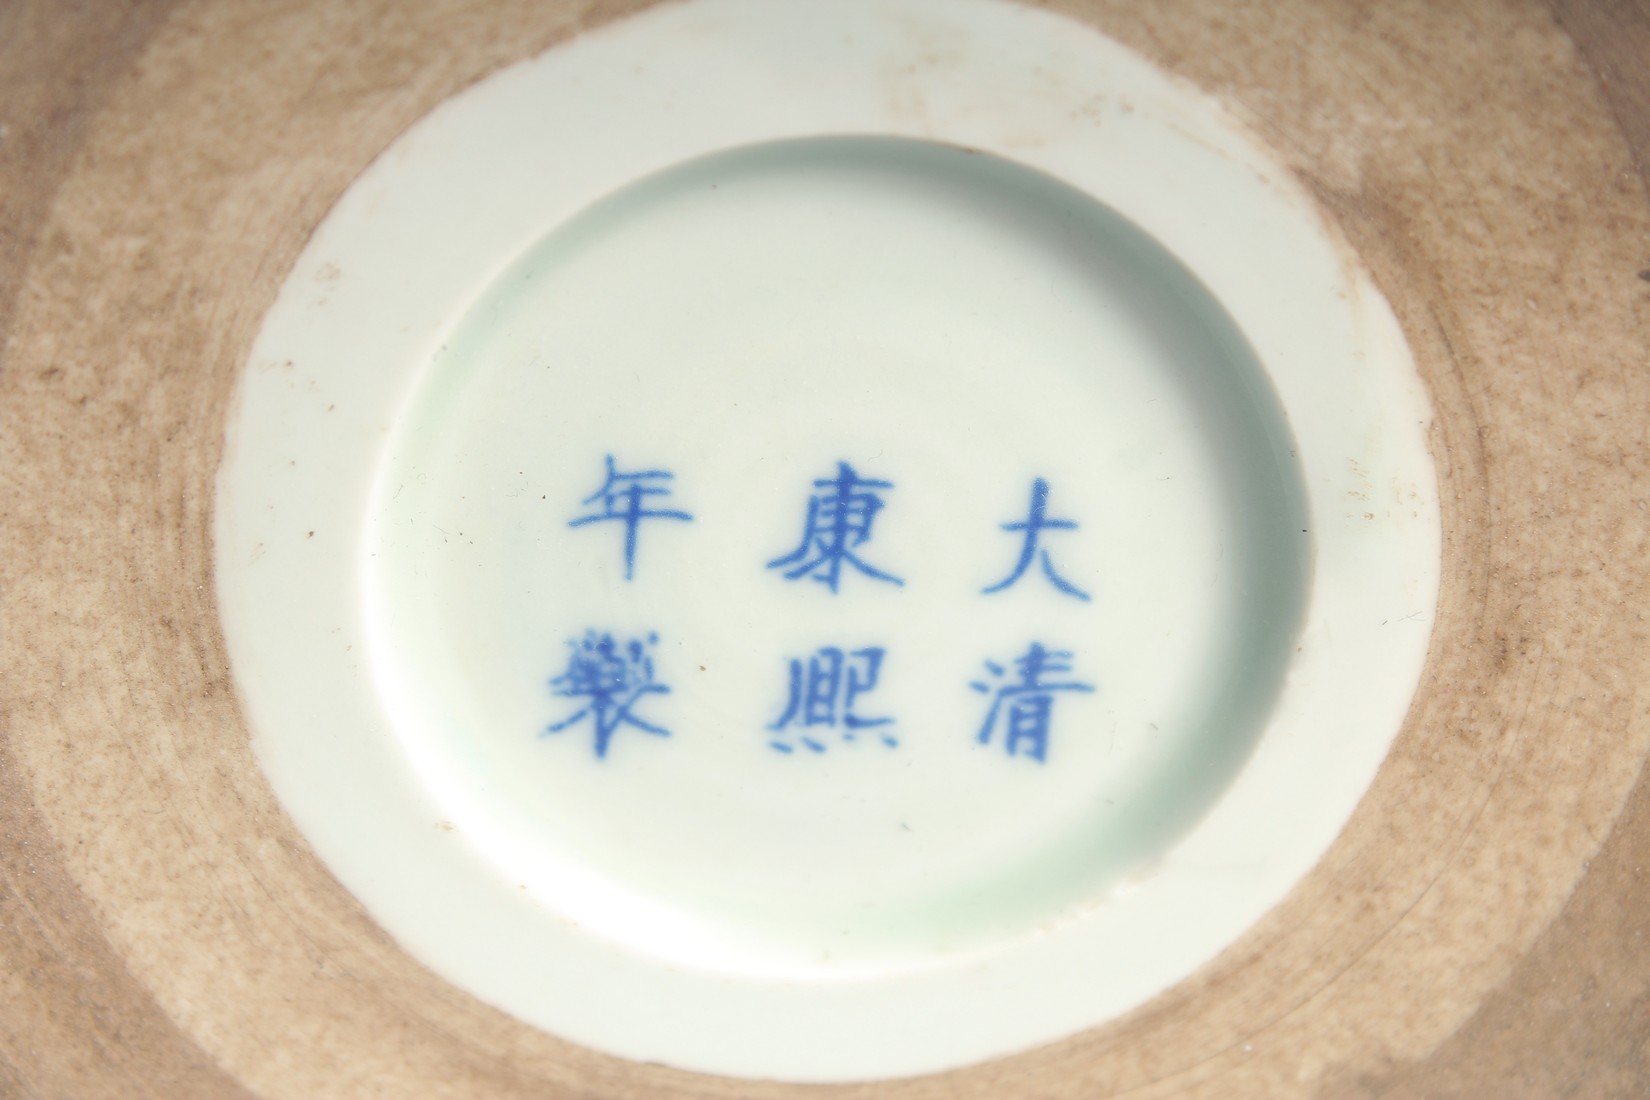 A LARGE CHINESE BLUE AND WHITE PORCELAIN BRUSH POT, the exterior with rows of characters, the base - Image 7 of 7